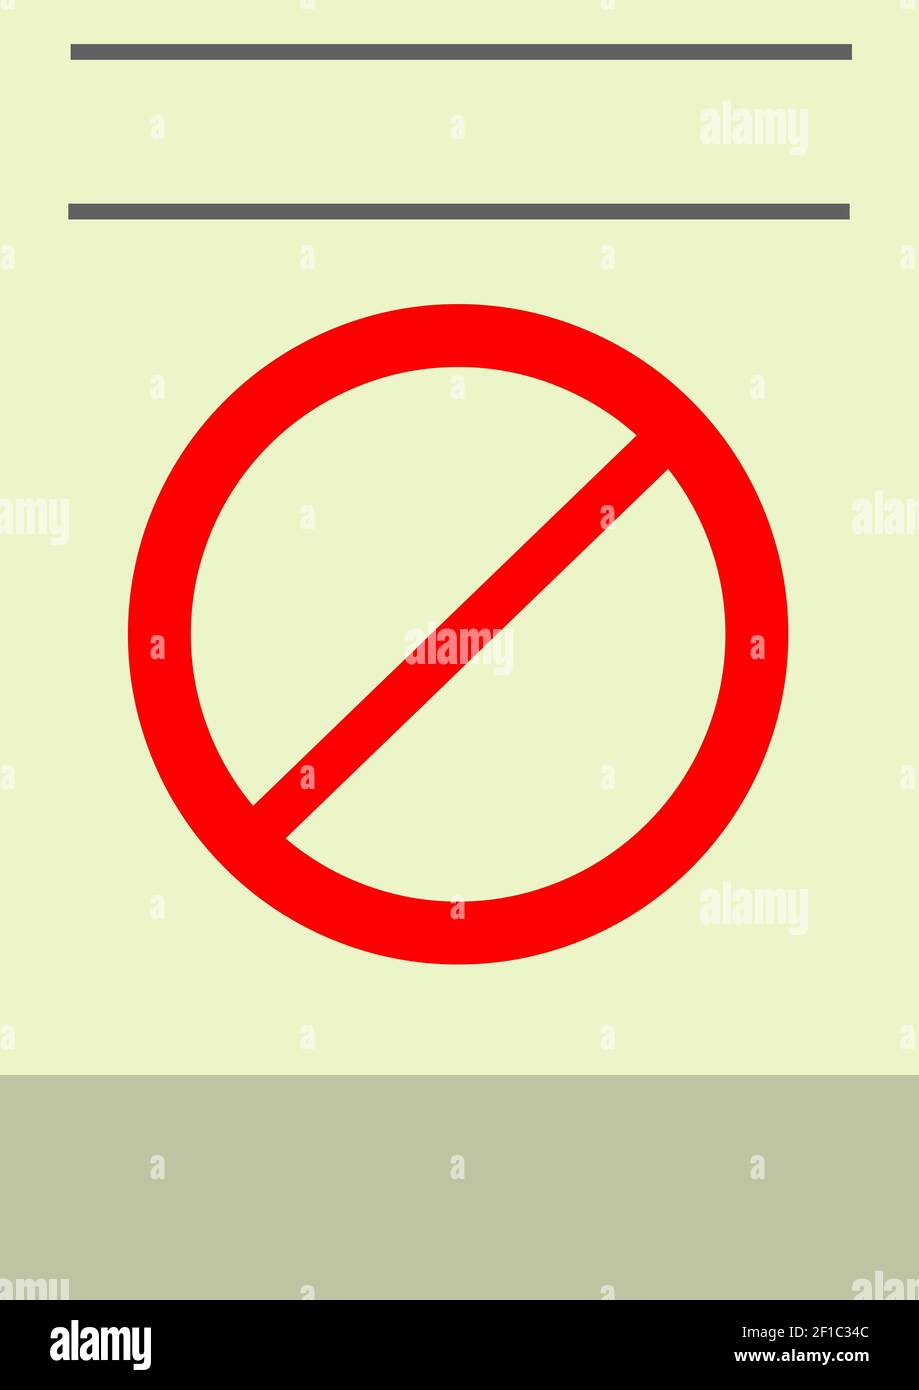 Composition of red circular prohibition symbol on off-white background Stock Photo